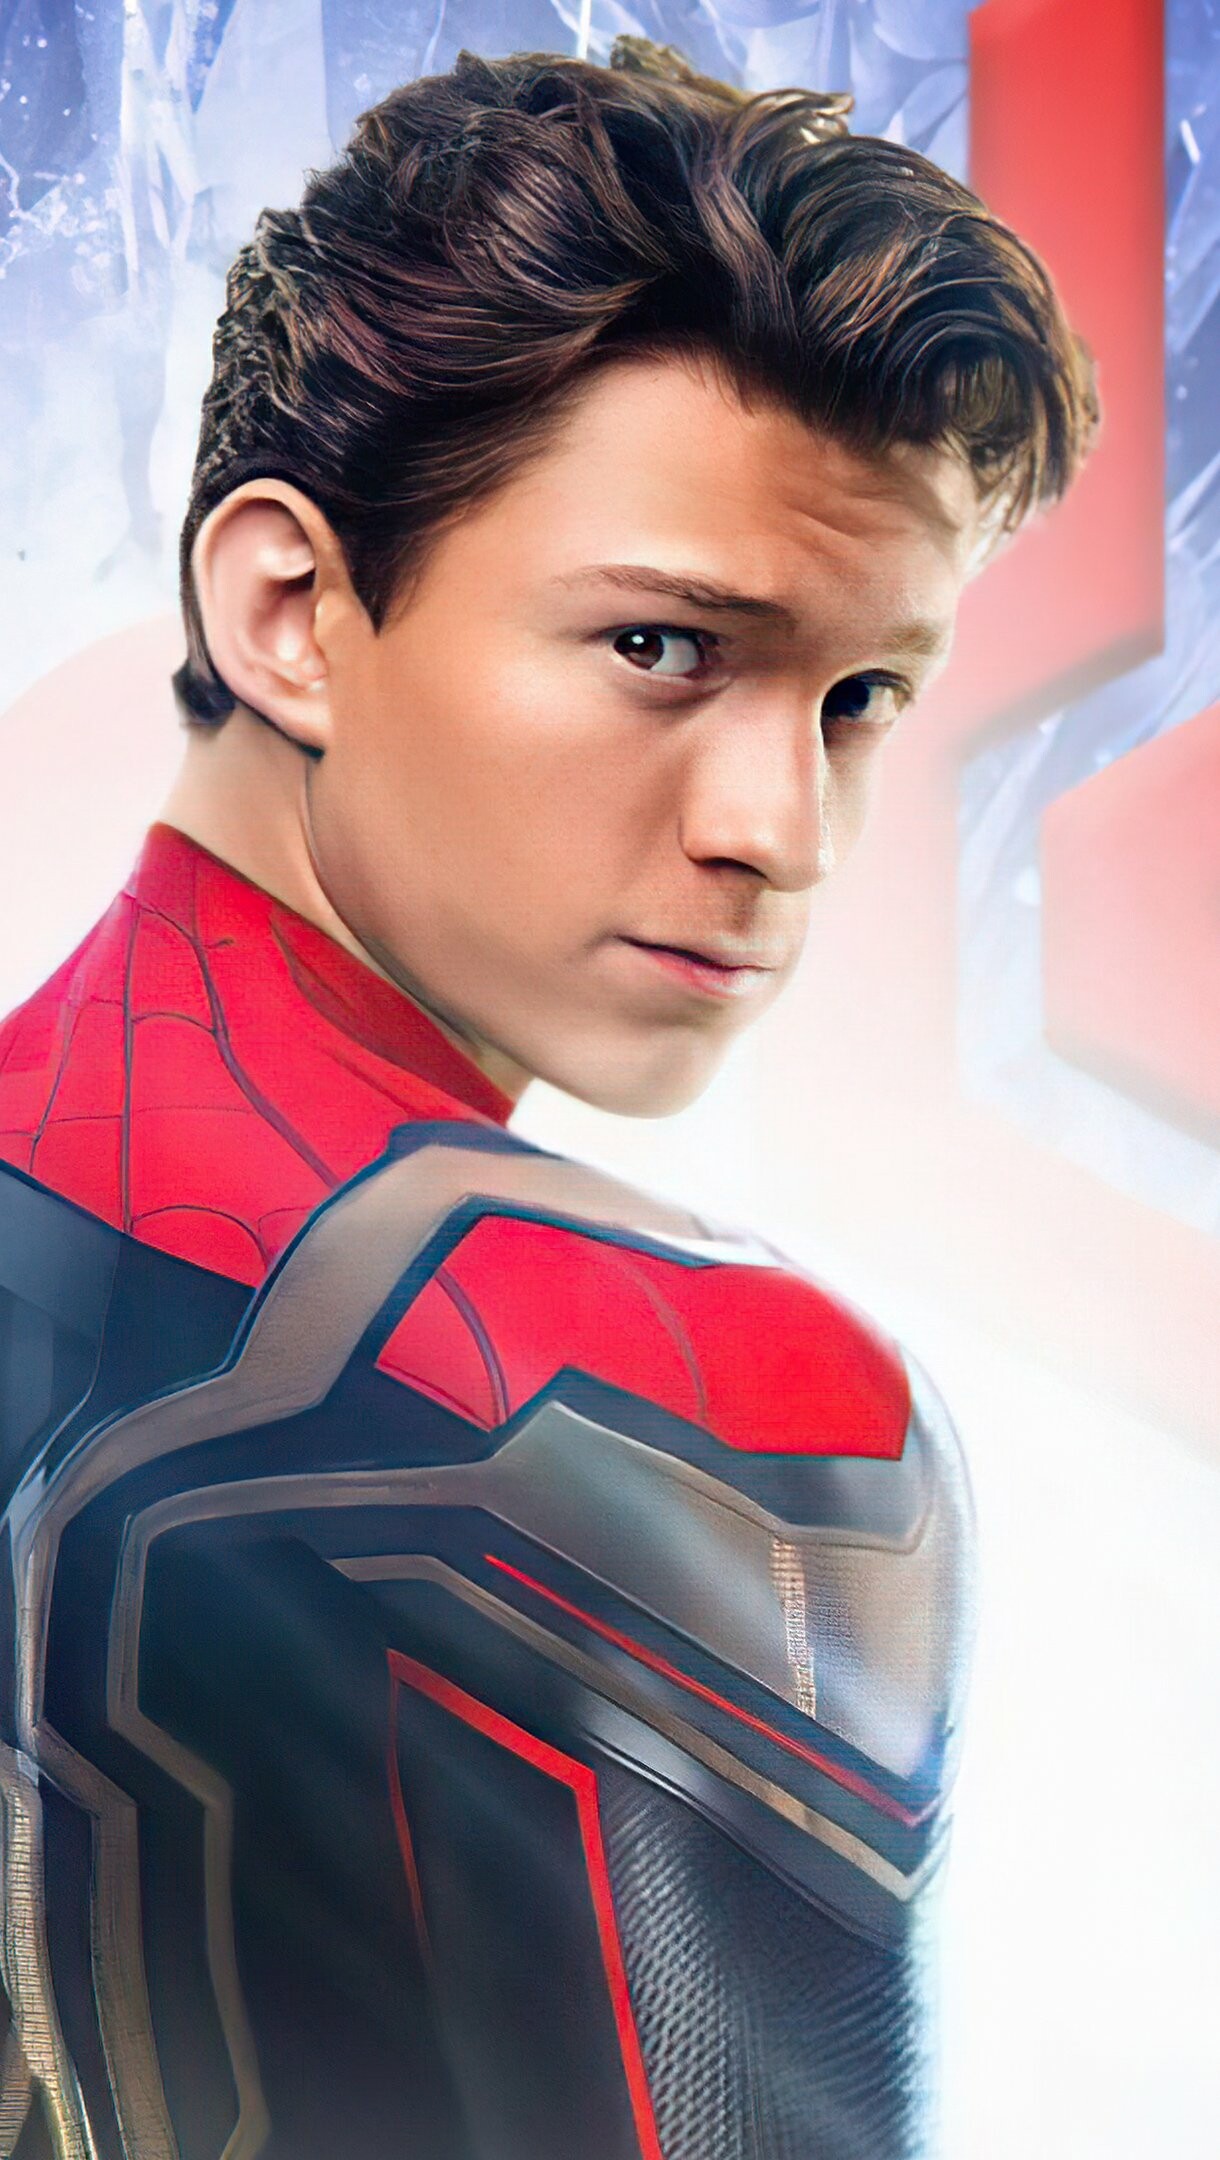 Tom Holland: Spider-Man: No Way Home, Peter Parker, a teenager and Avenger who received spider-like abilities. 1220x2160 HD Background.